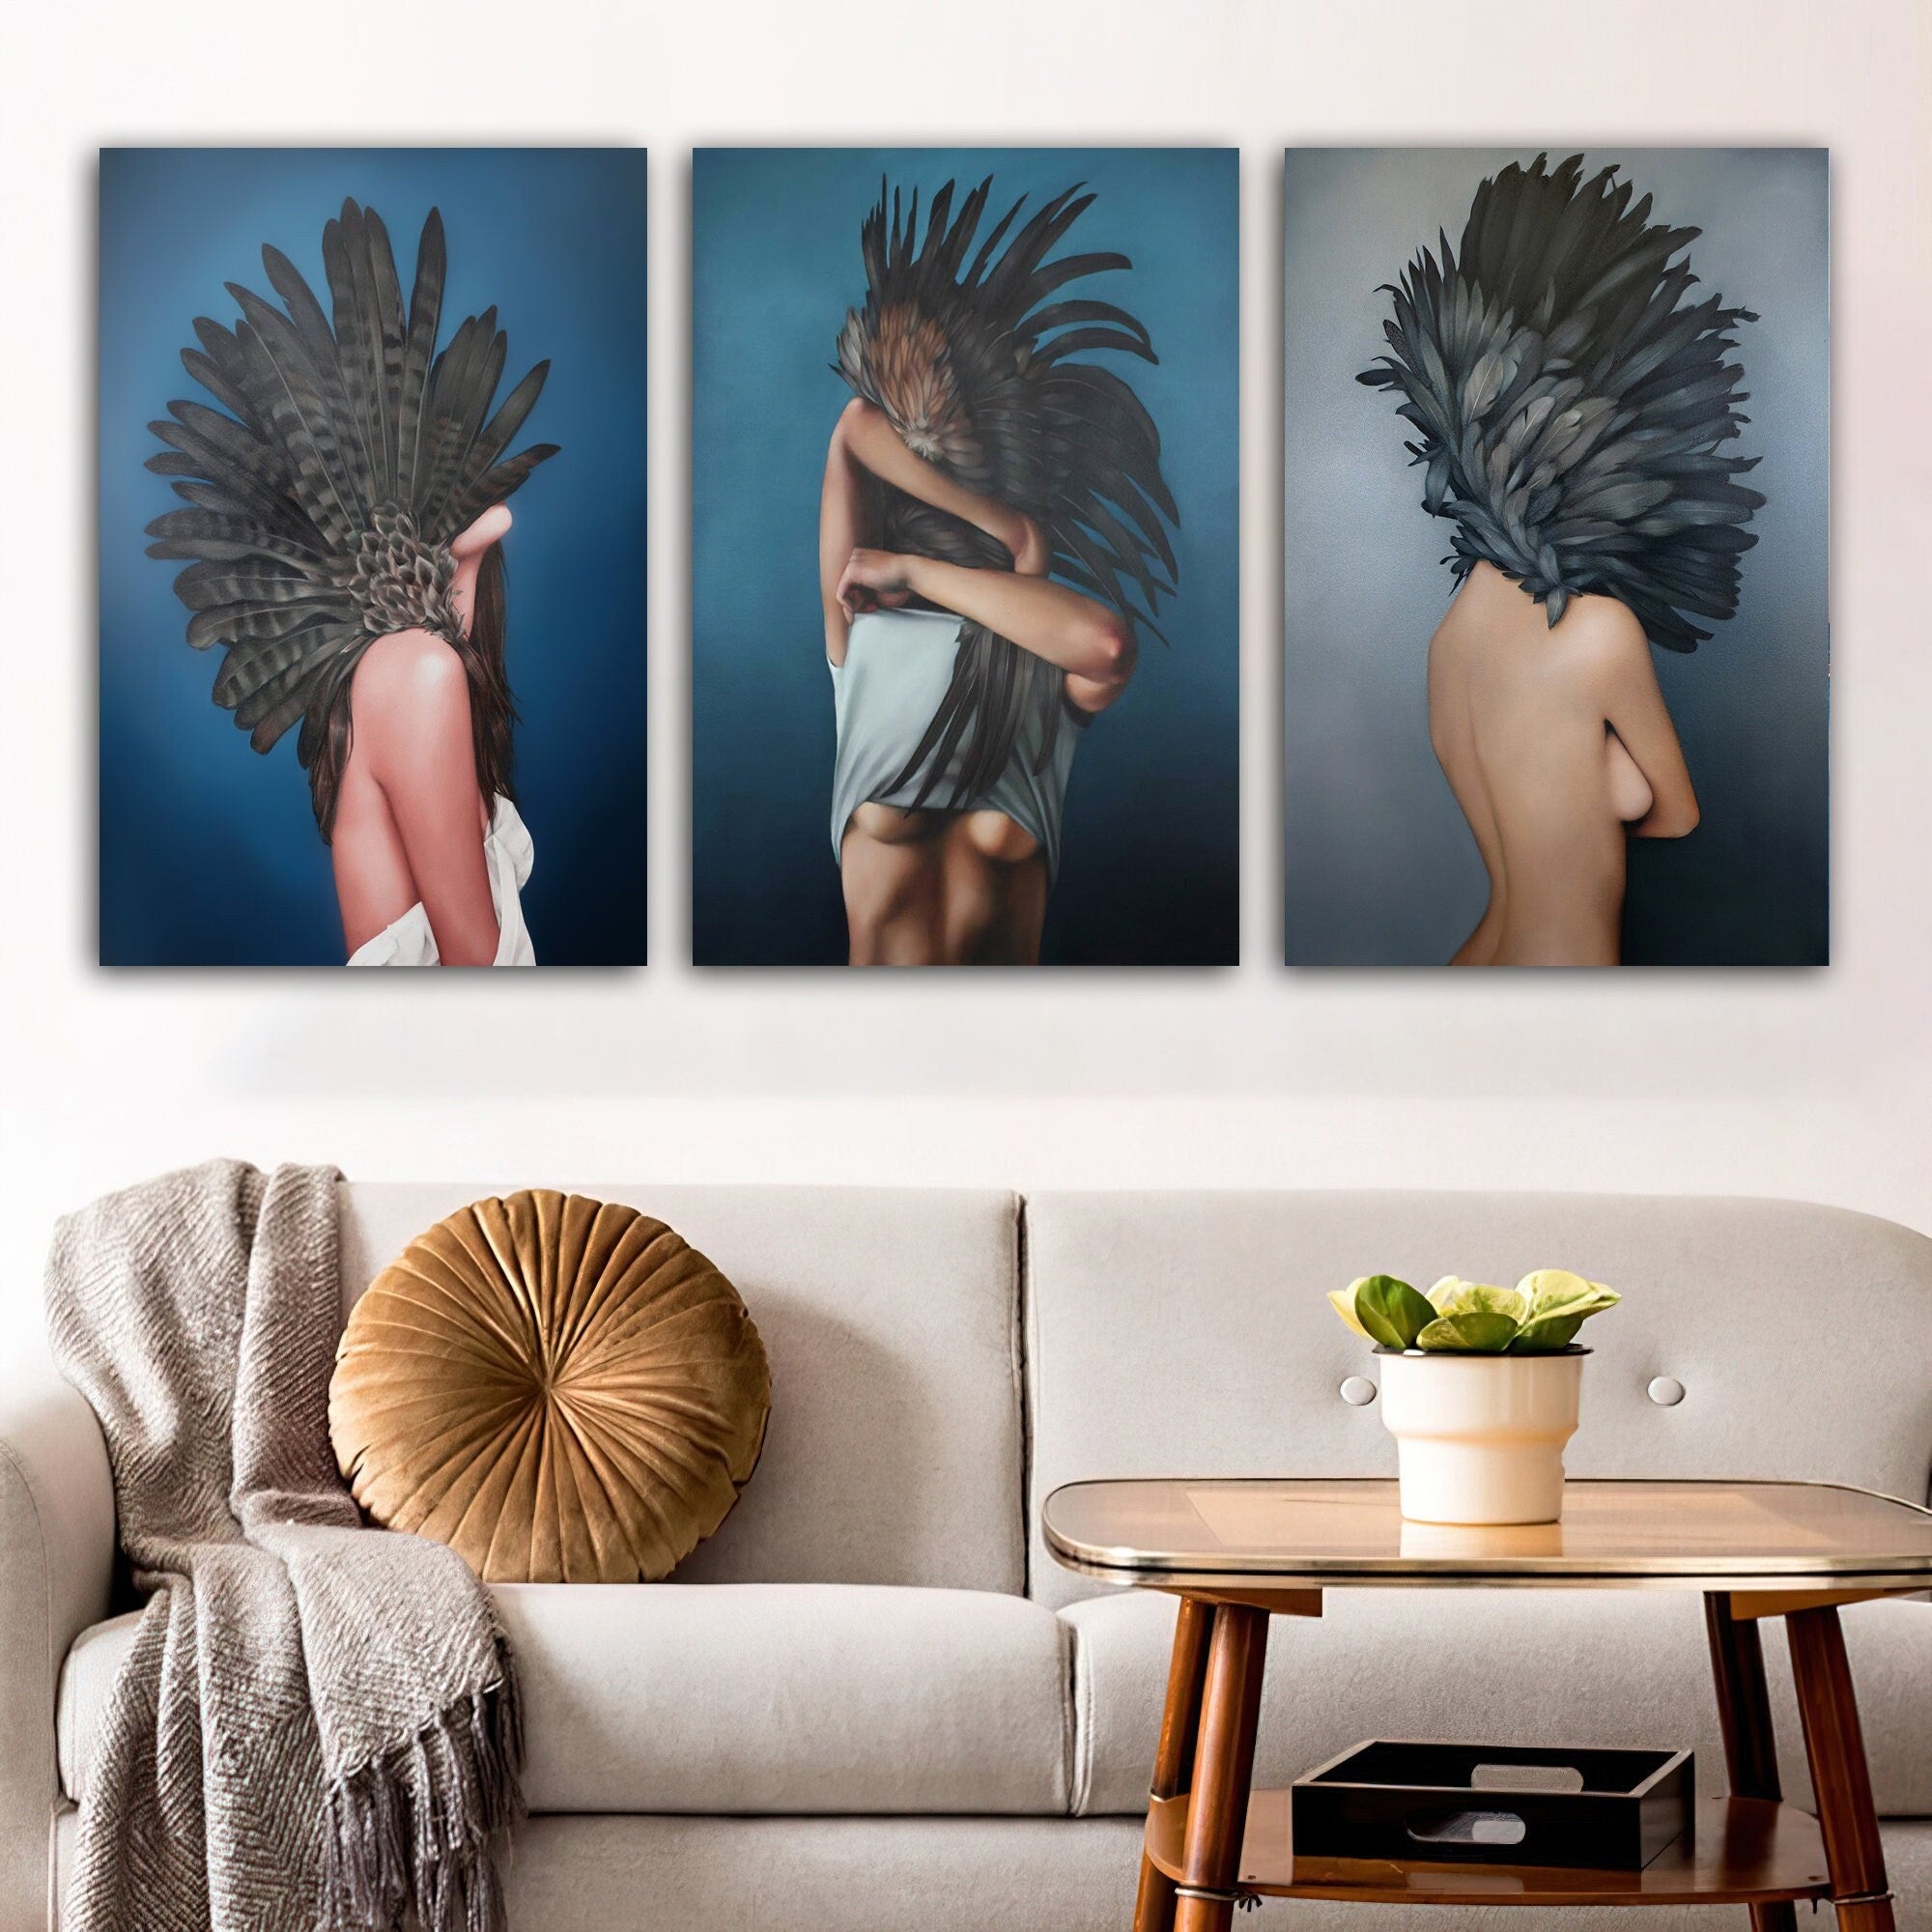 lady with flower body canvas print,woman with flower head canvas painting,feather headed women canvas painting,women wall decor art